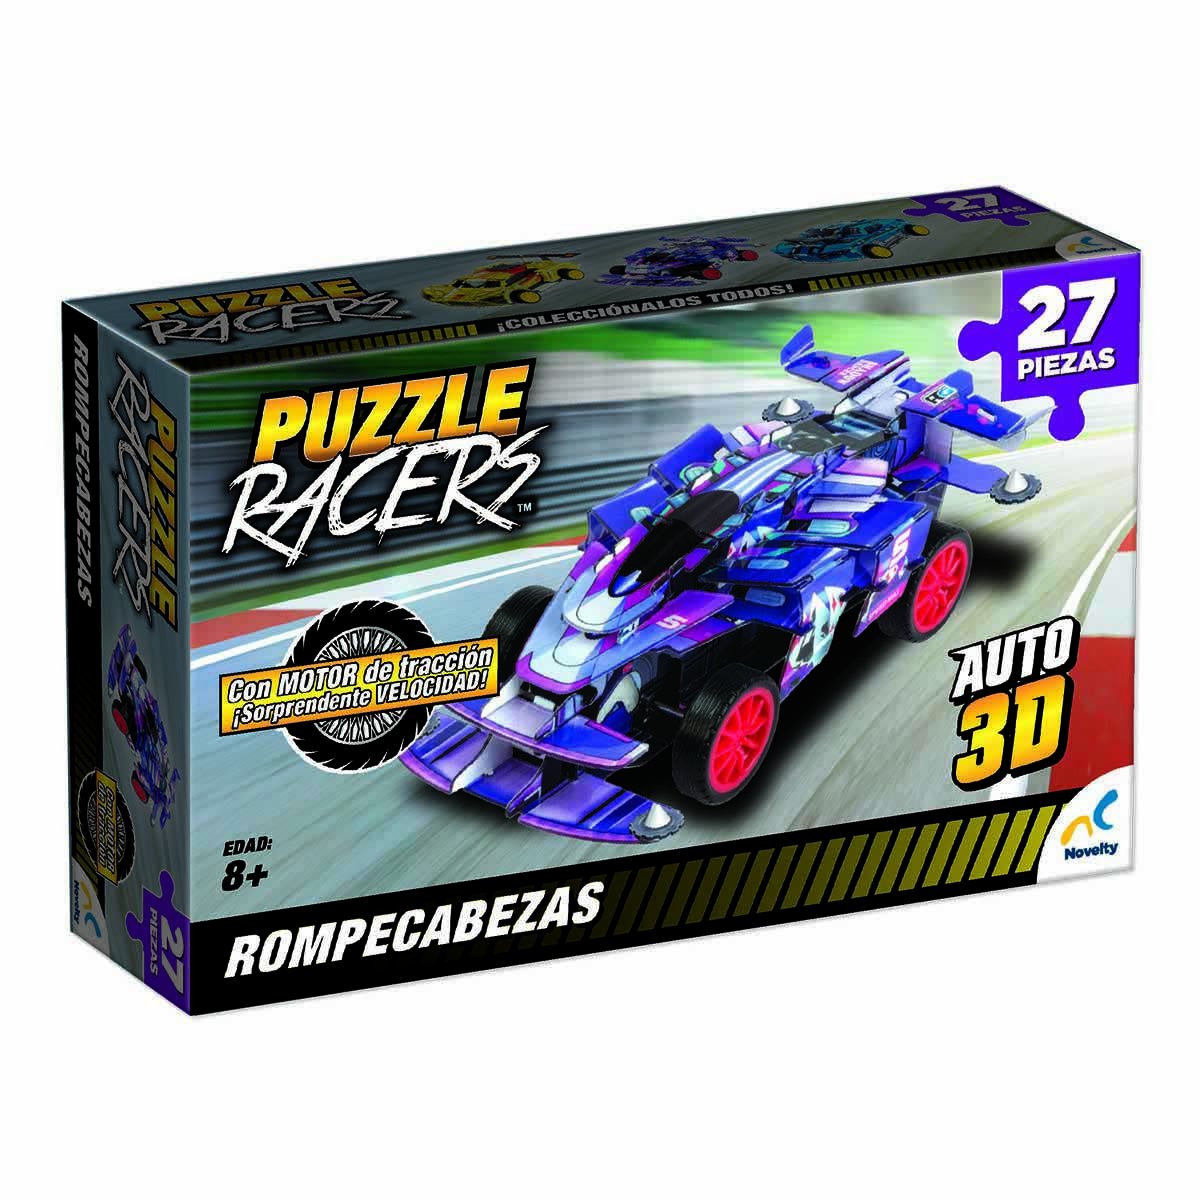 Puzzle Racers Novelty